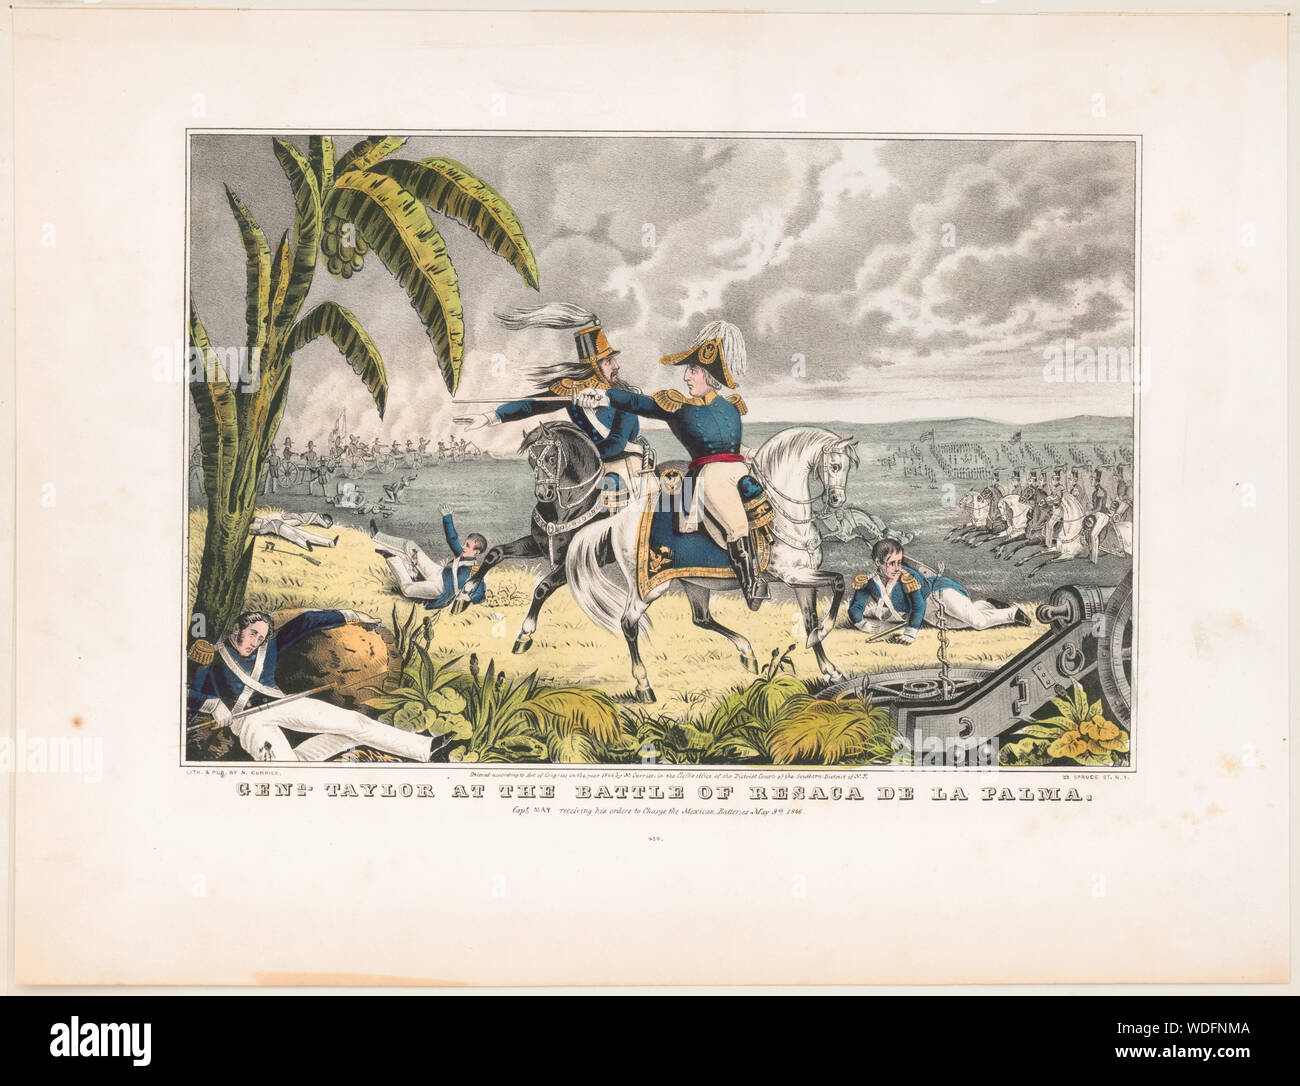 Genl. Taylor at the battle of Resaca de la Palma Capt. May receiving his orders to charge the Mexican batteries May 9th 1846. Abstract: 1 print : lithograph, hand-colored. Stock Photo